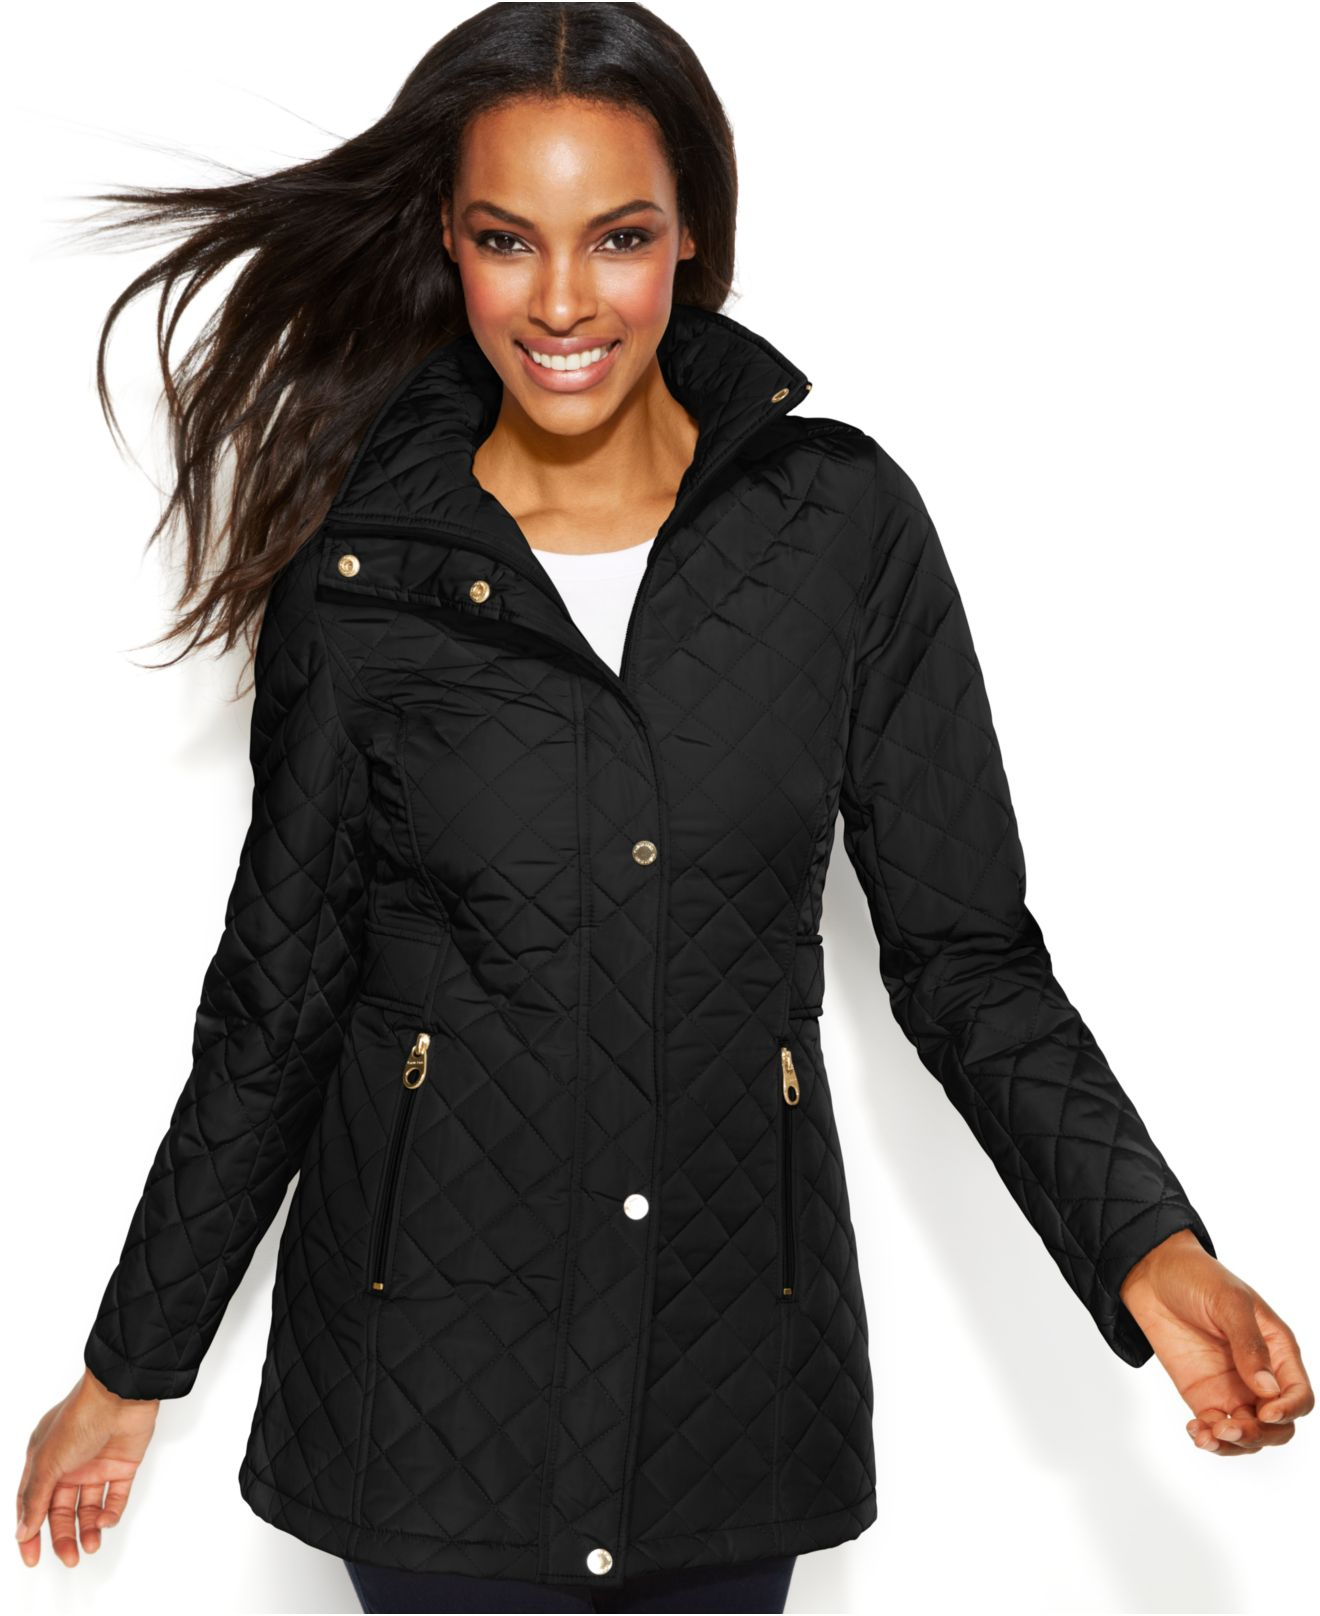 Lyst - Calvin Klein Hooded Quilted Jacket in Black